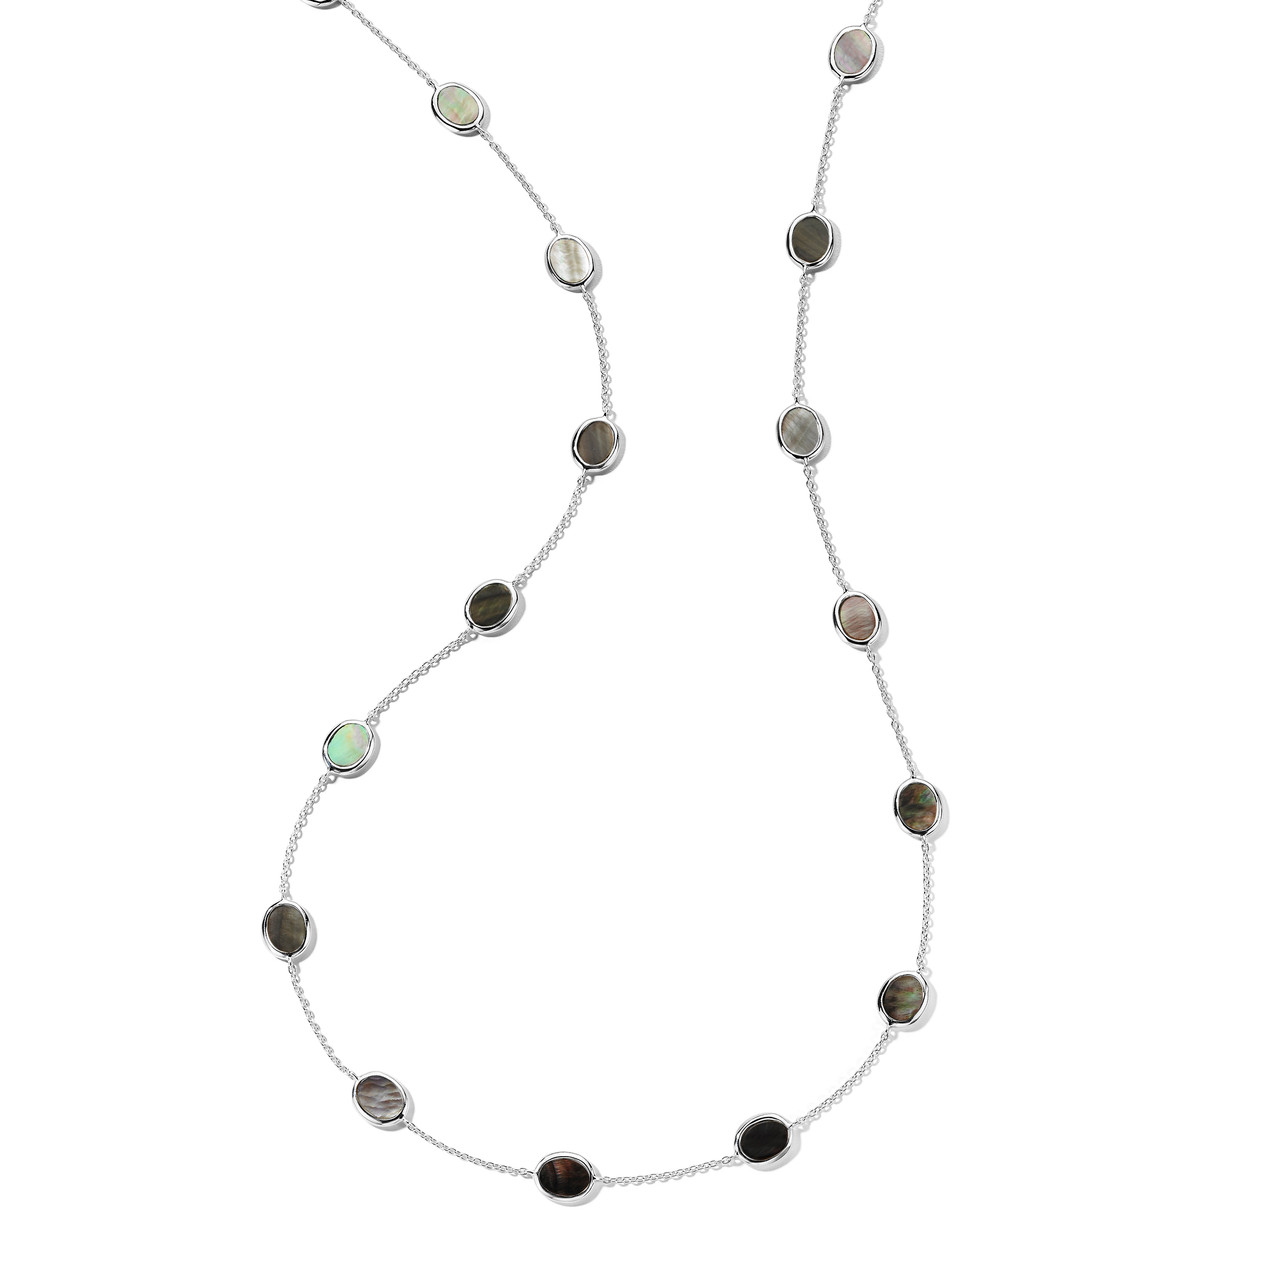 Polished Rock Candy Long Confetti Necklace in Sterling Silver SN1811BKL ...